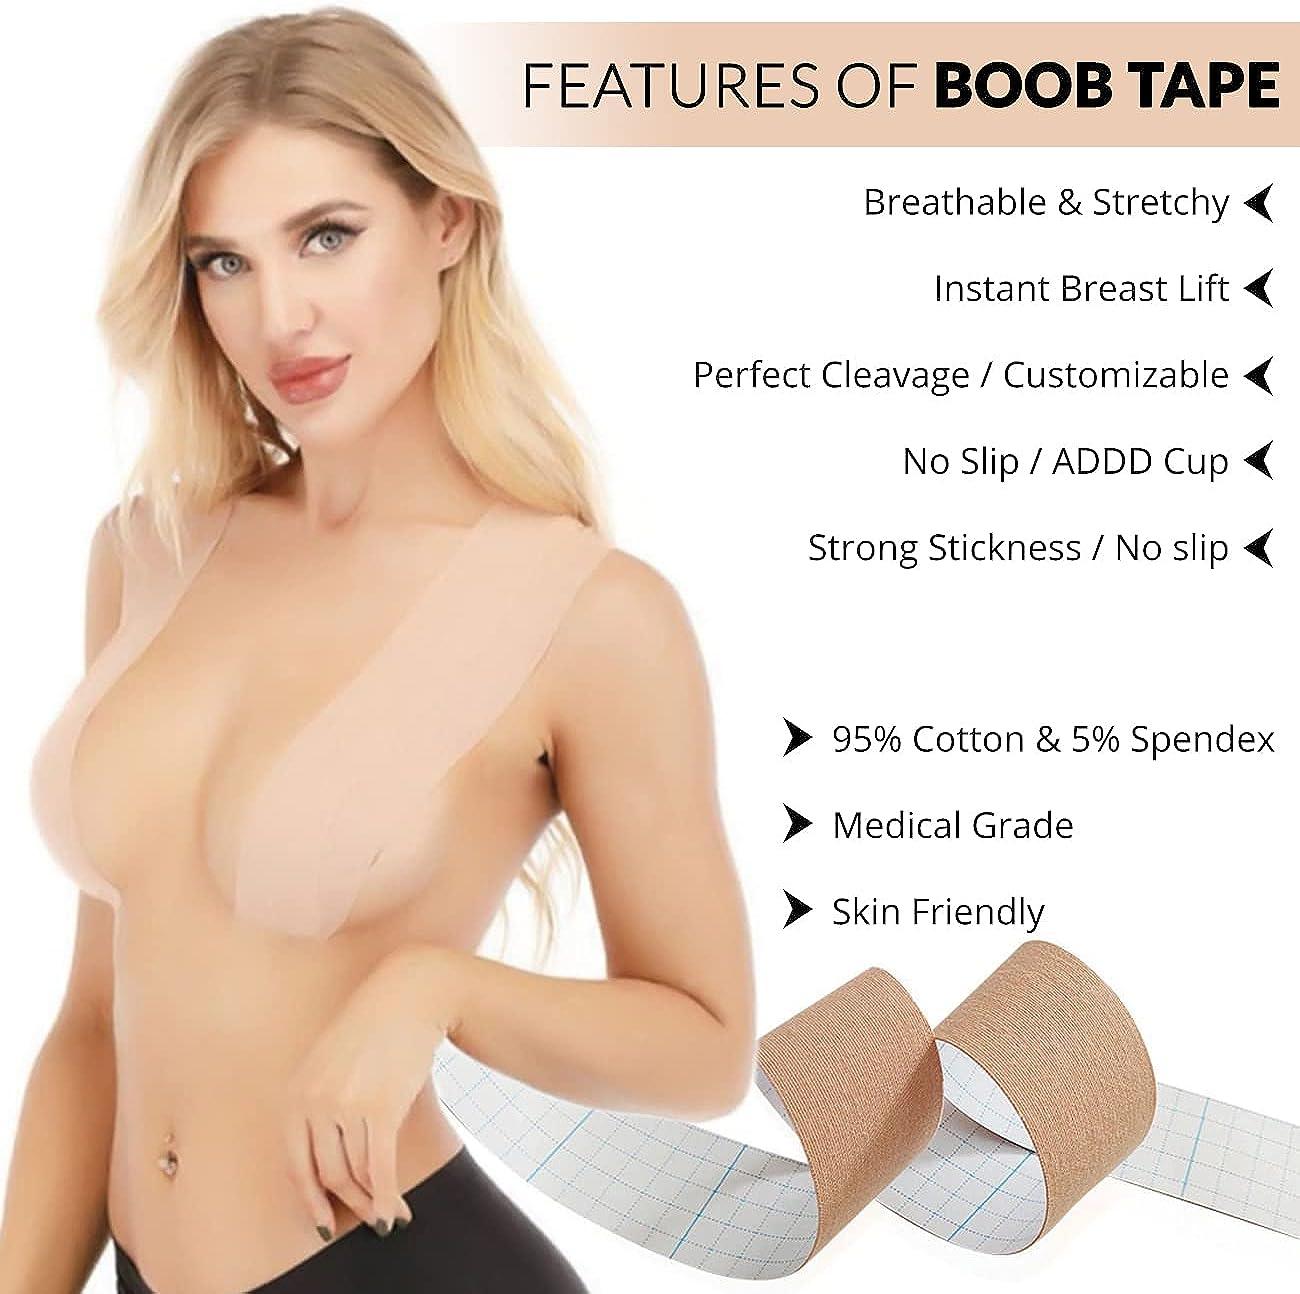 Boob Tape Boobytape Breathable Breast Support Tape Sticky Body Tape for  Push up & Shape in All Clothing Waterproof and Sweatproof Athletic Tape  Body Tape&10 Pcs Disposable Breast Patch